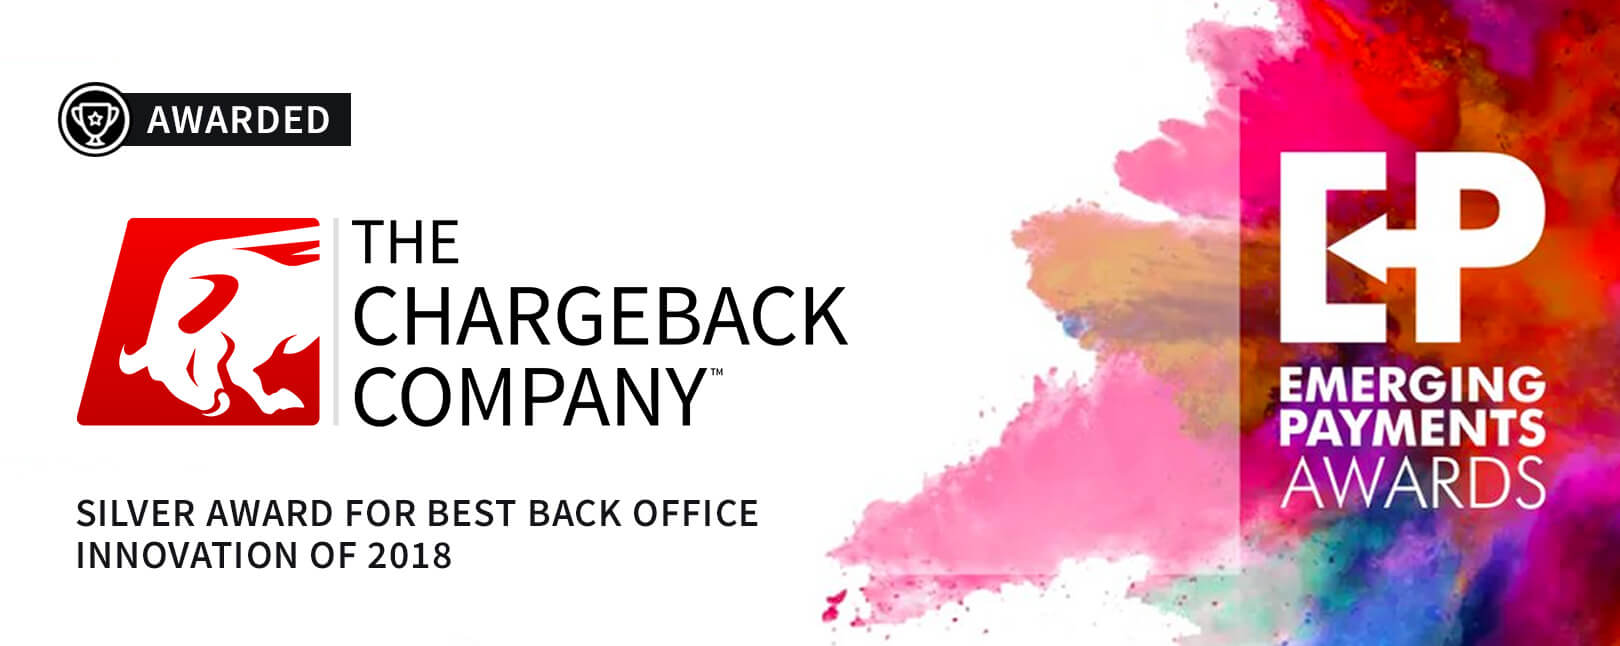 The Chargeback Company Wins “Best Back Office Innovation”